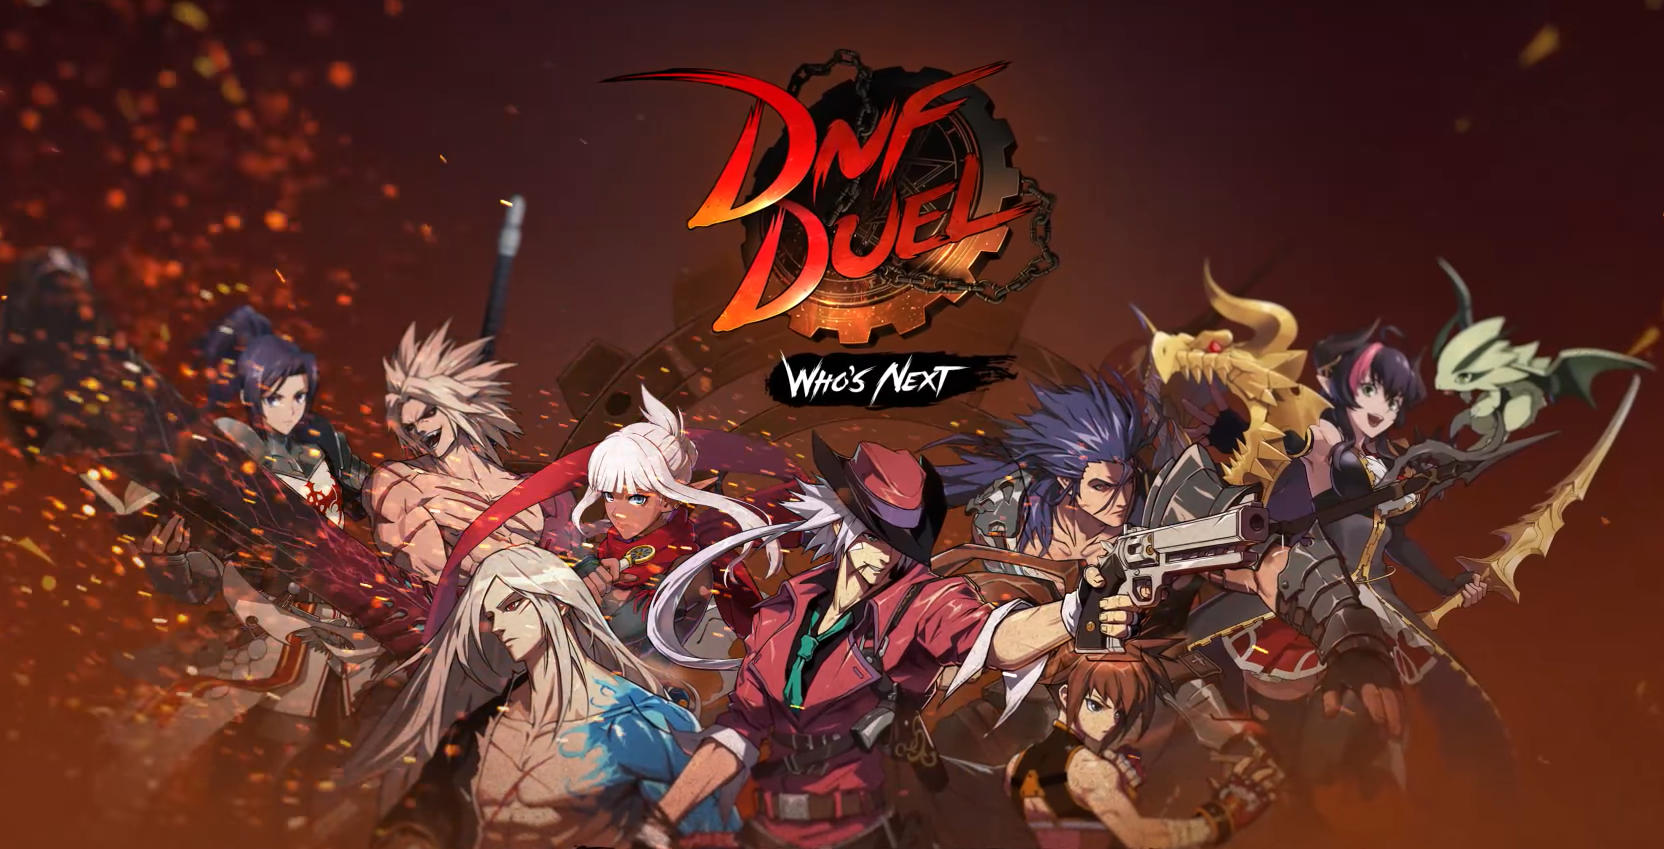 dnf duel price download free